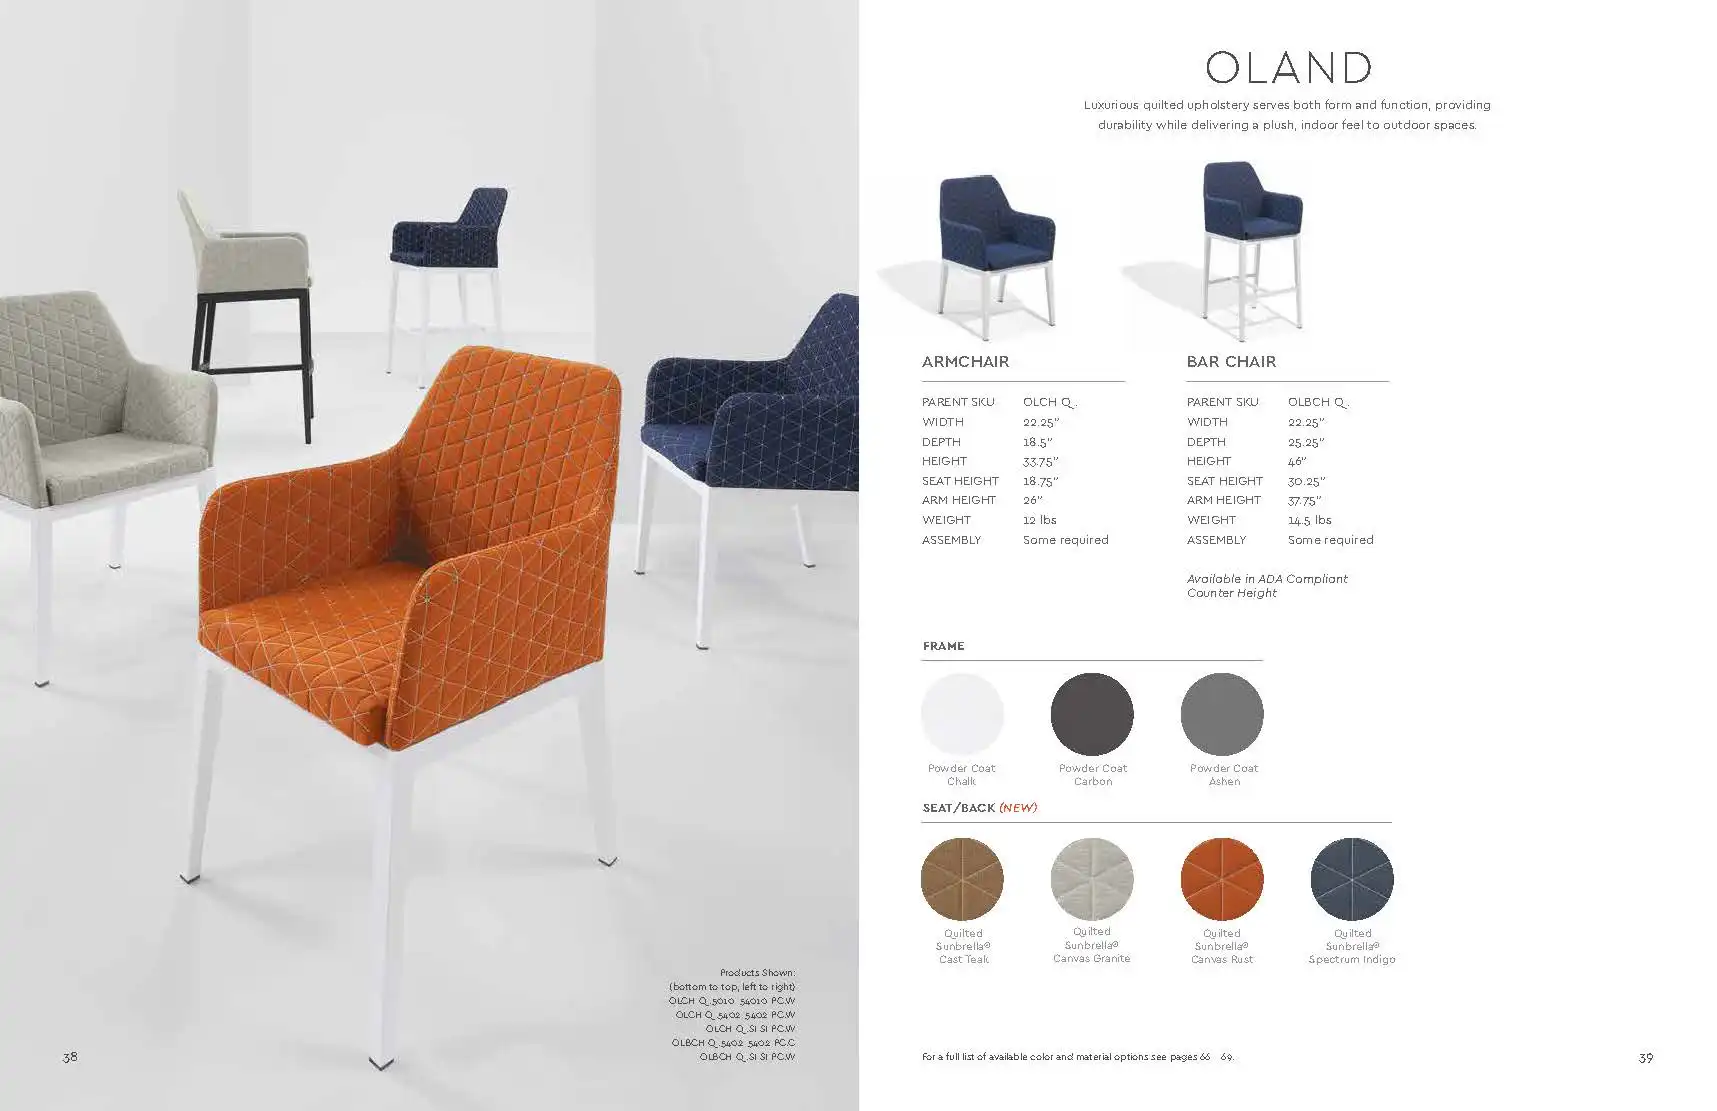 OLAND (New for 2021) Arm Chairs by Oxford Garden